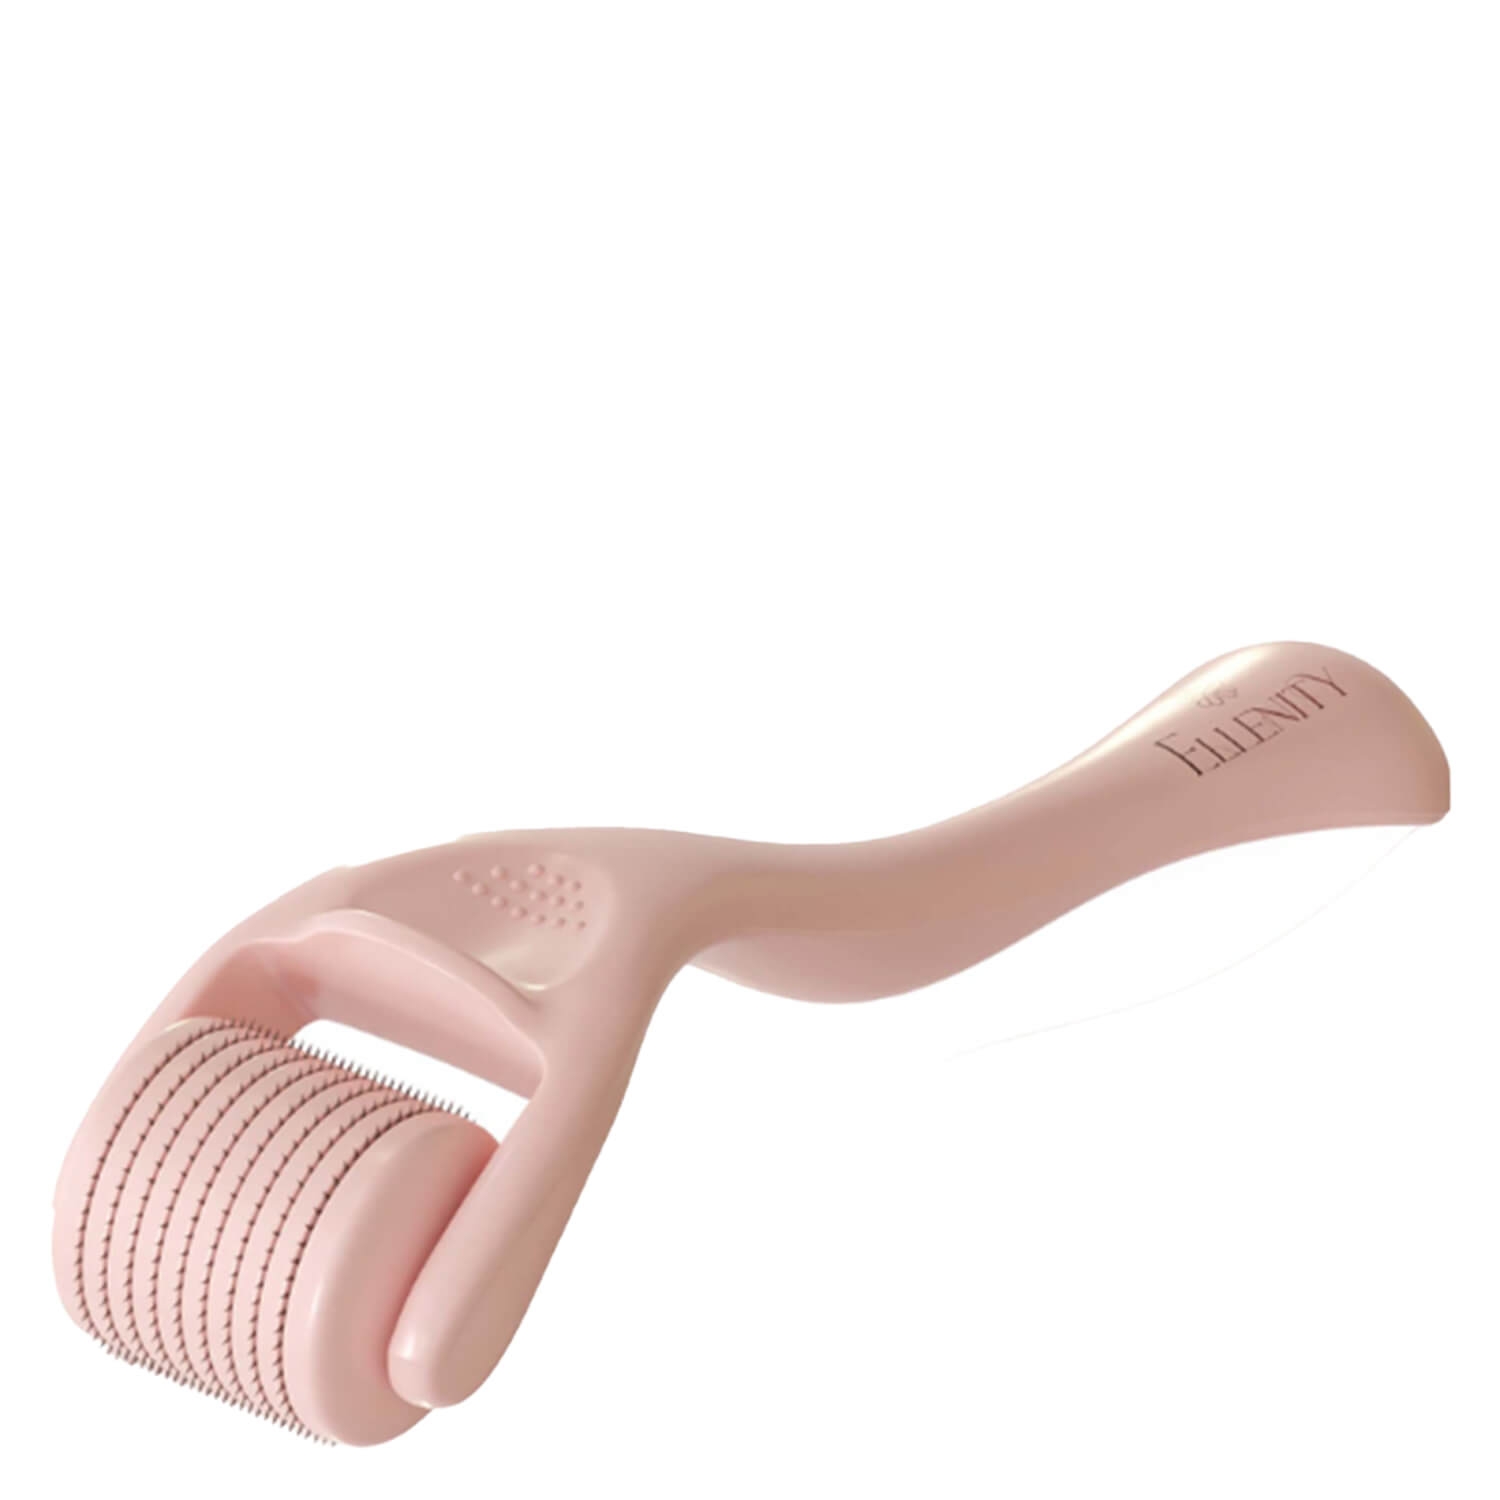 Product image from ELLENITY - Microneedling Dermroller